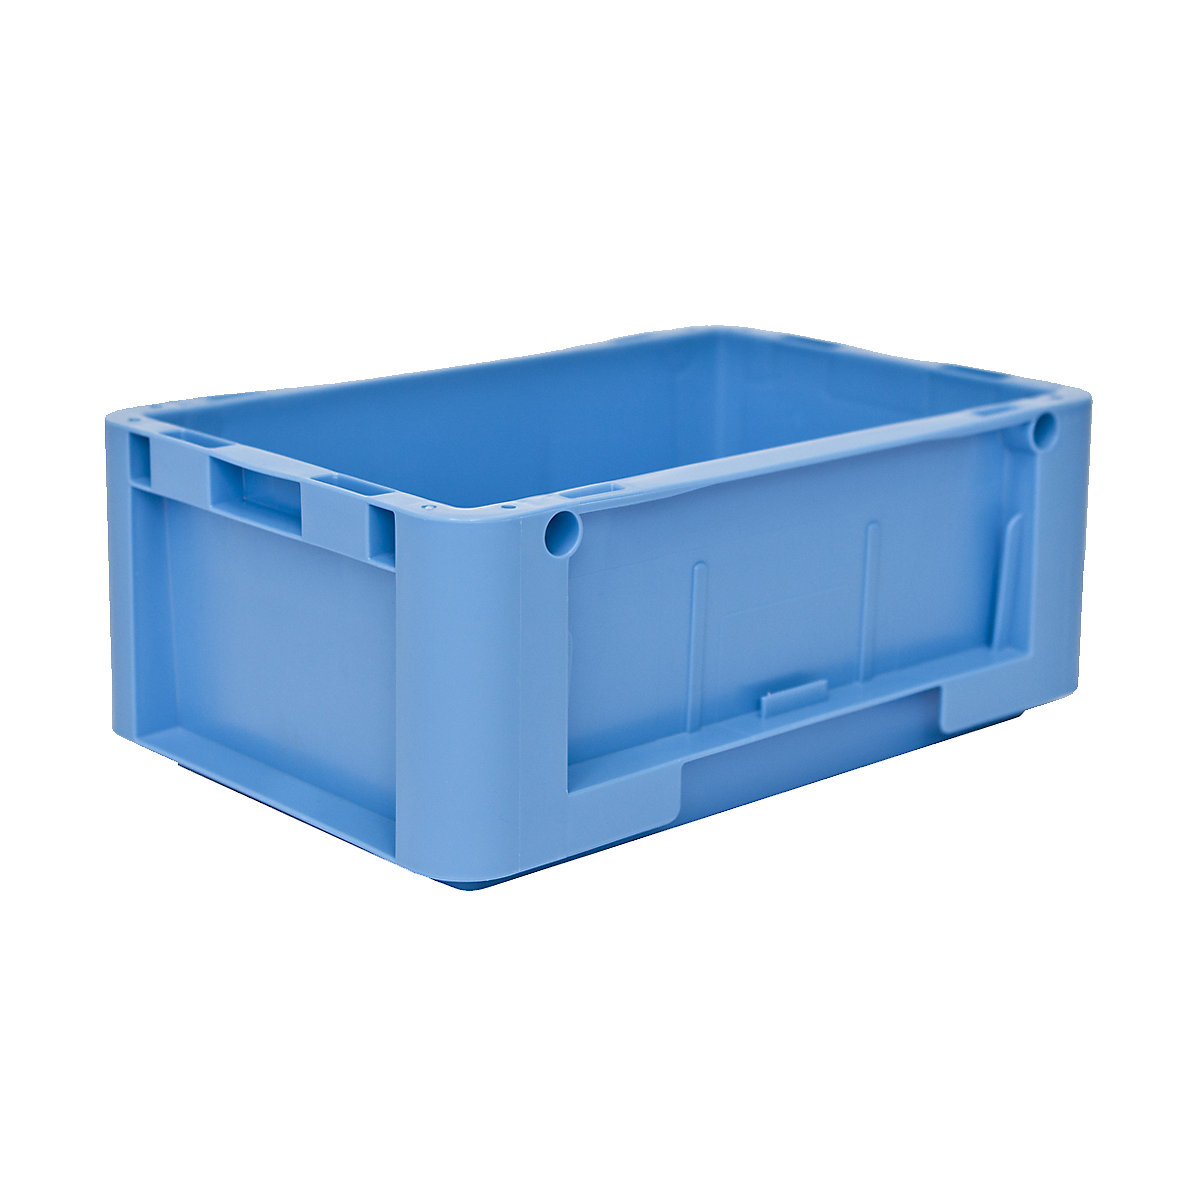 Euro size stacking containers, external LxWxH 300 x 200 x 120 mm, blue, pack of 12